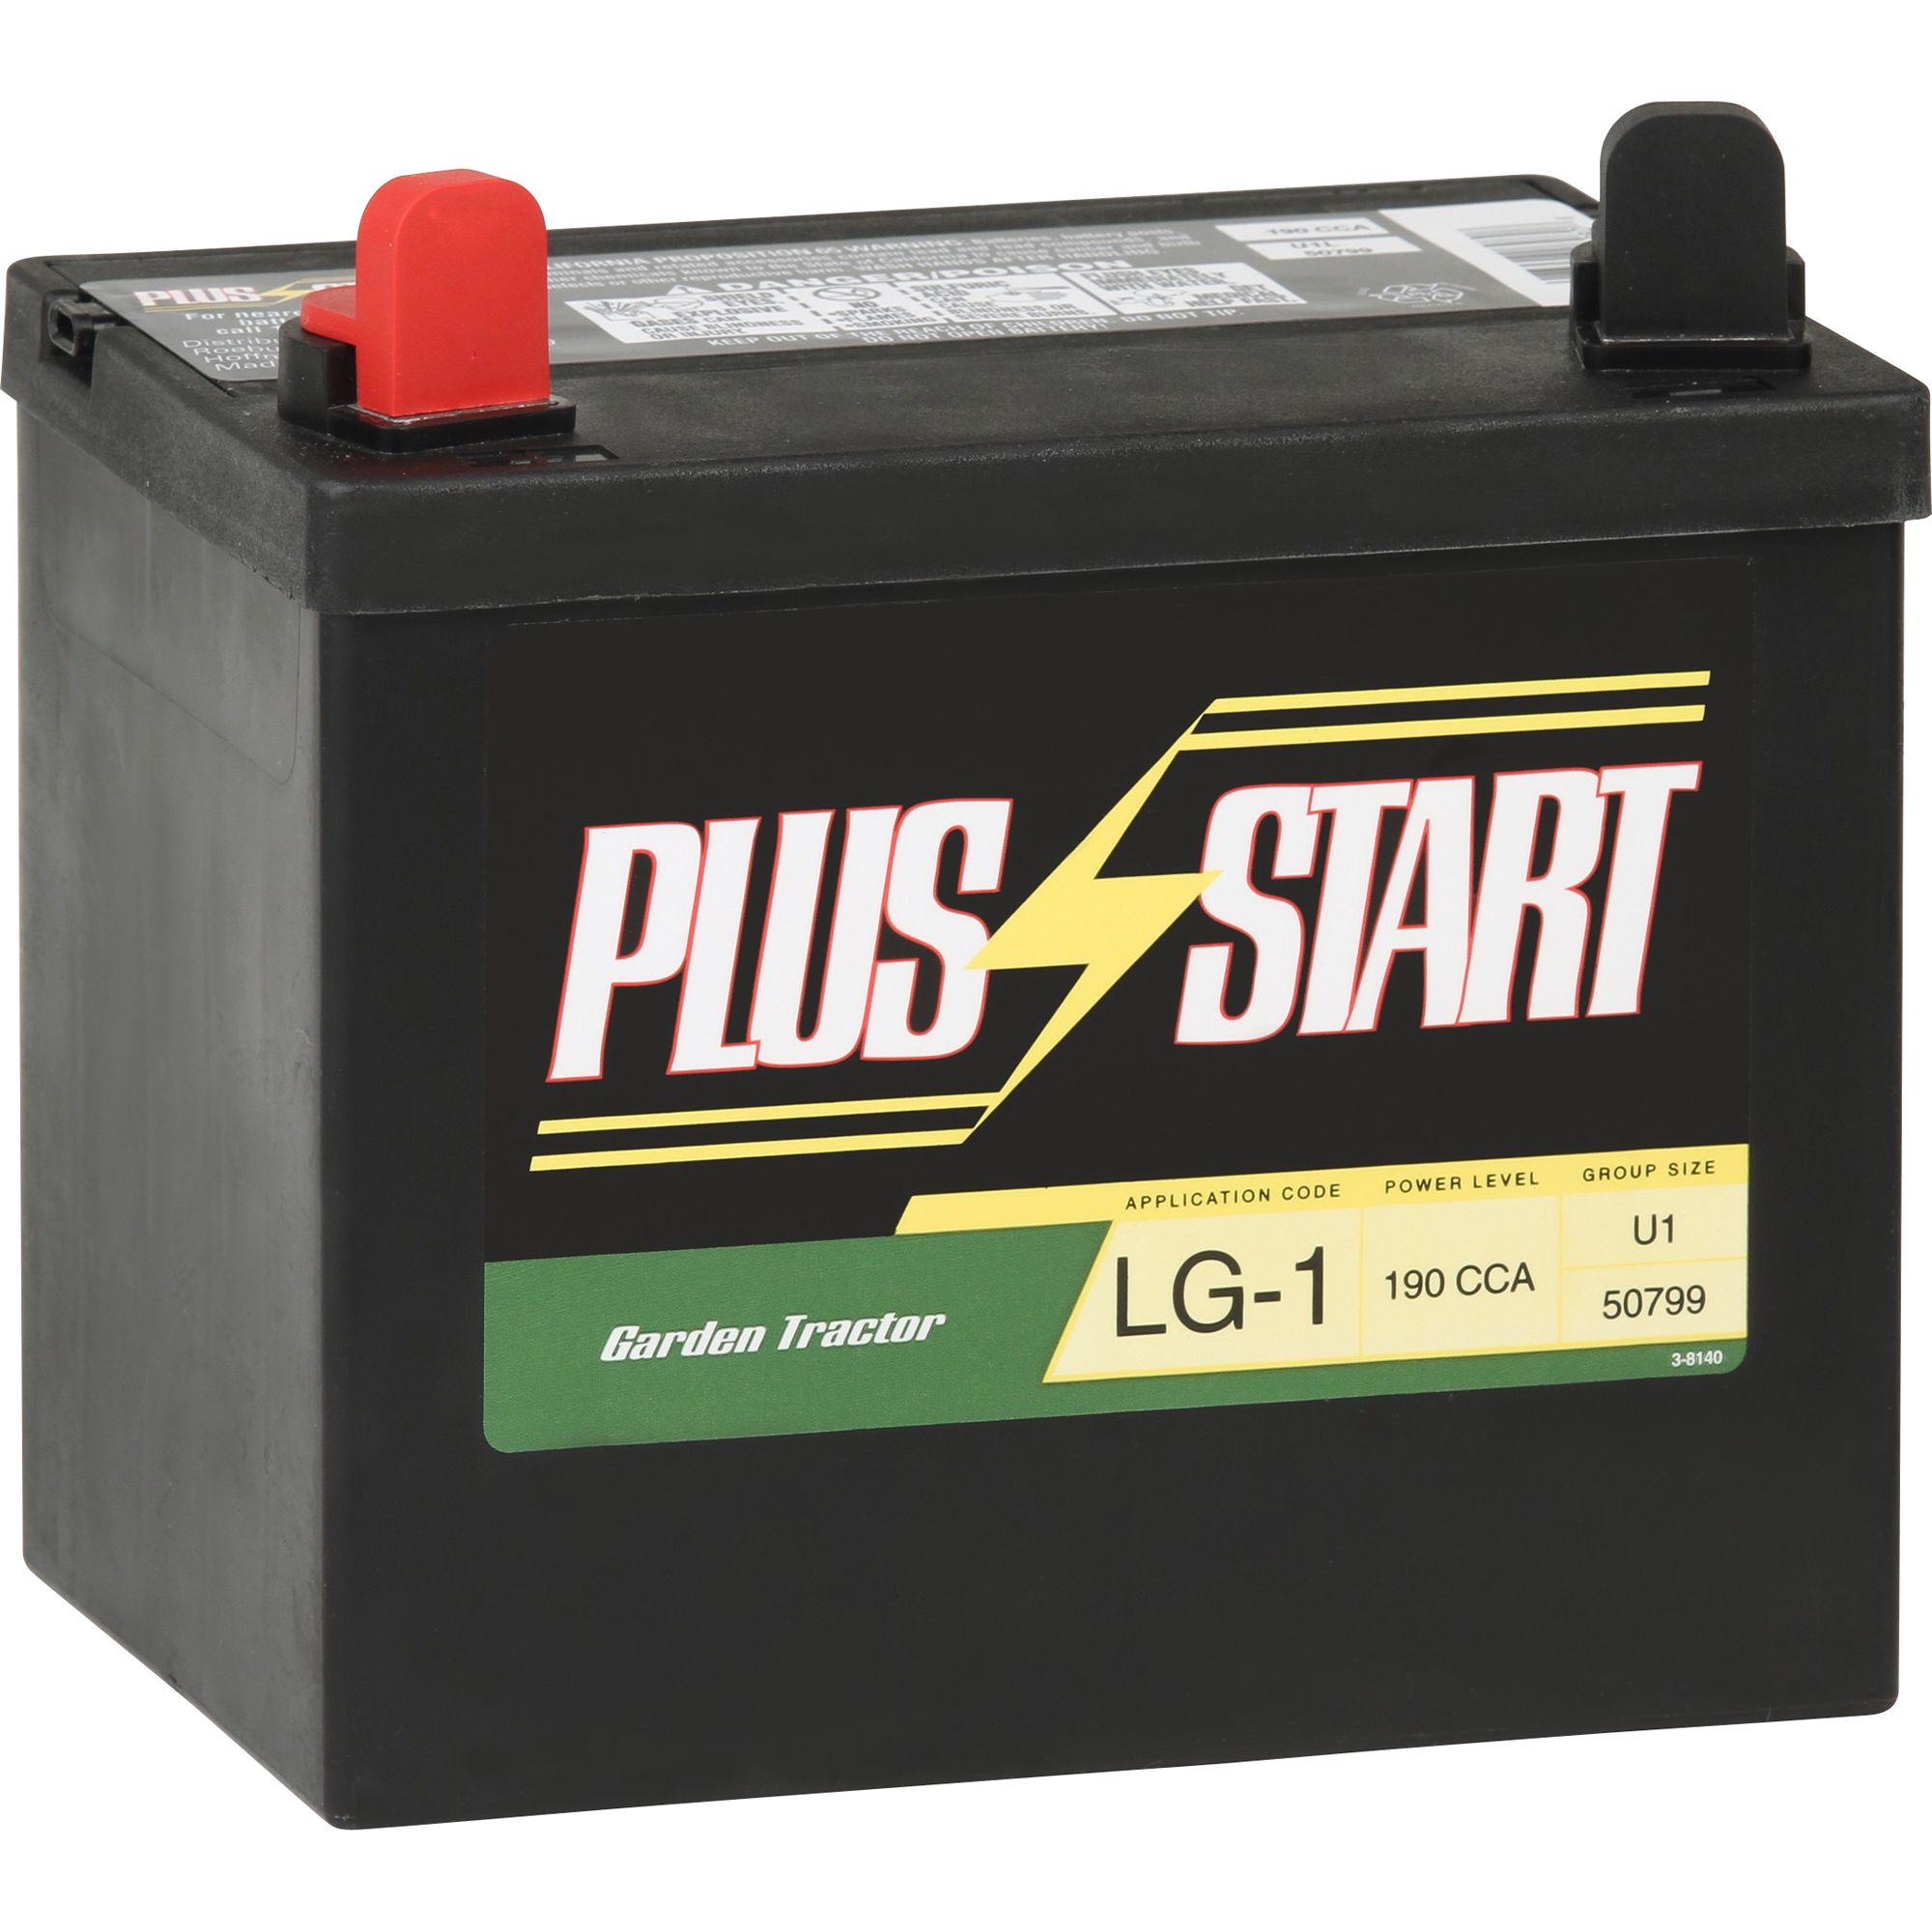 Lawn Garden Battery Group Size U1 Price With Exchange Gtin